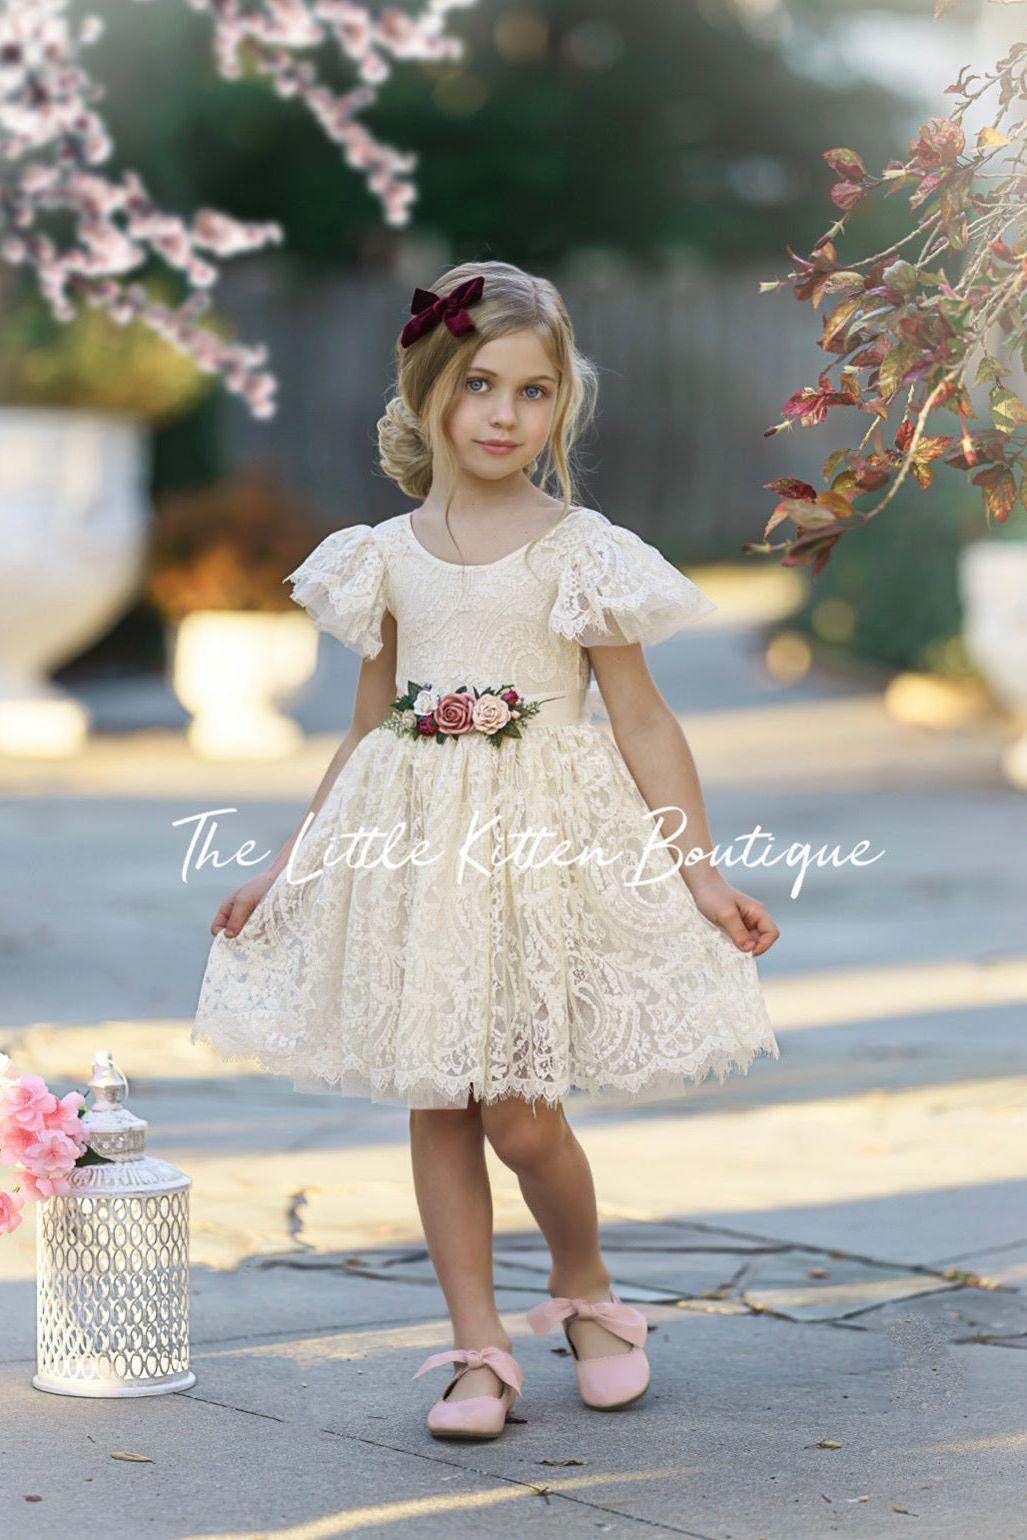 Flower Girl Dress / Special Occasion Dress for Girls, with Ruffle Sleeve - The Little Kitten Boutique